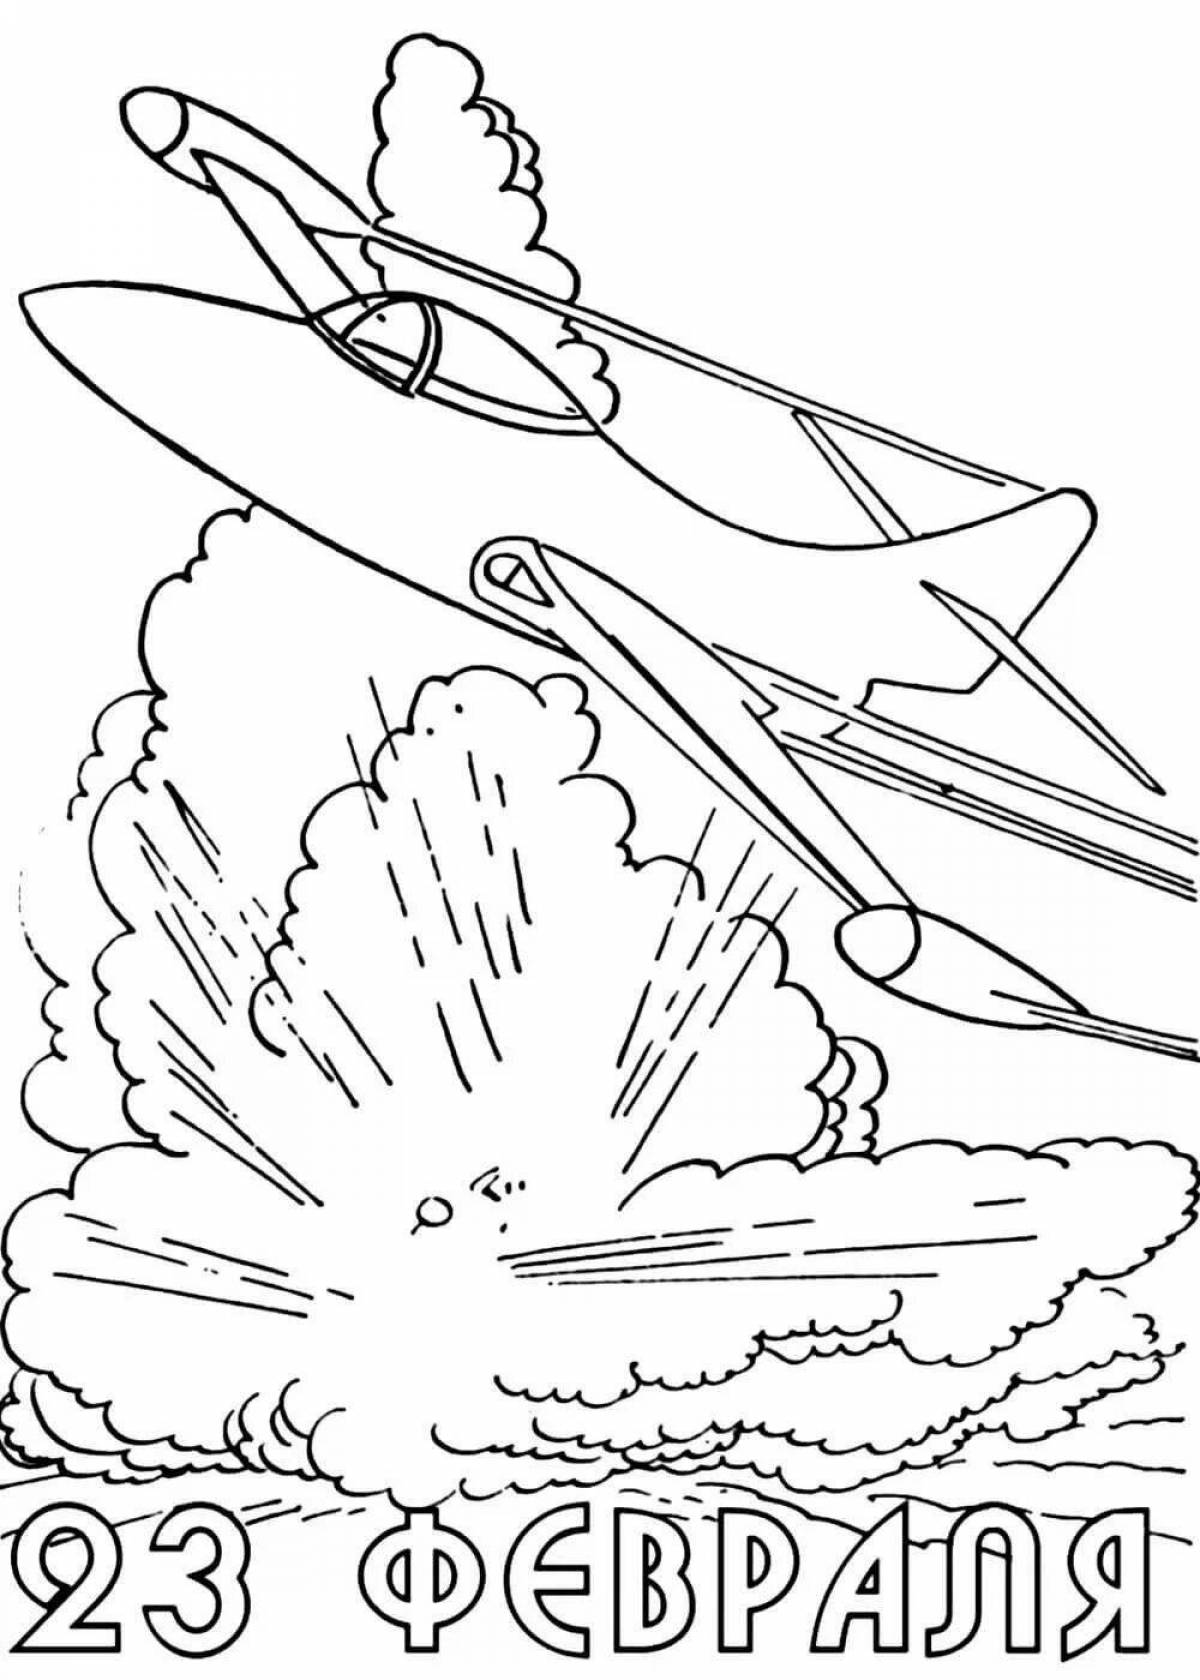 Glorious military badge coloring page